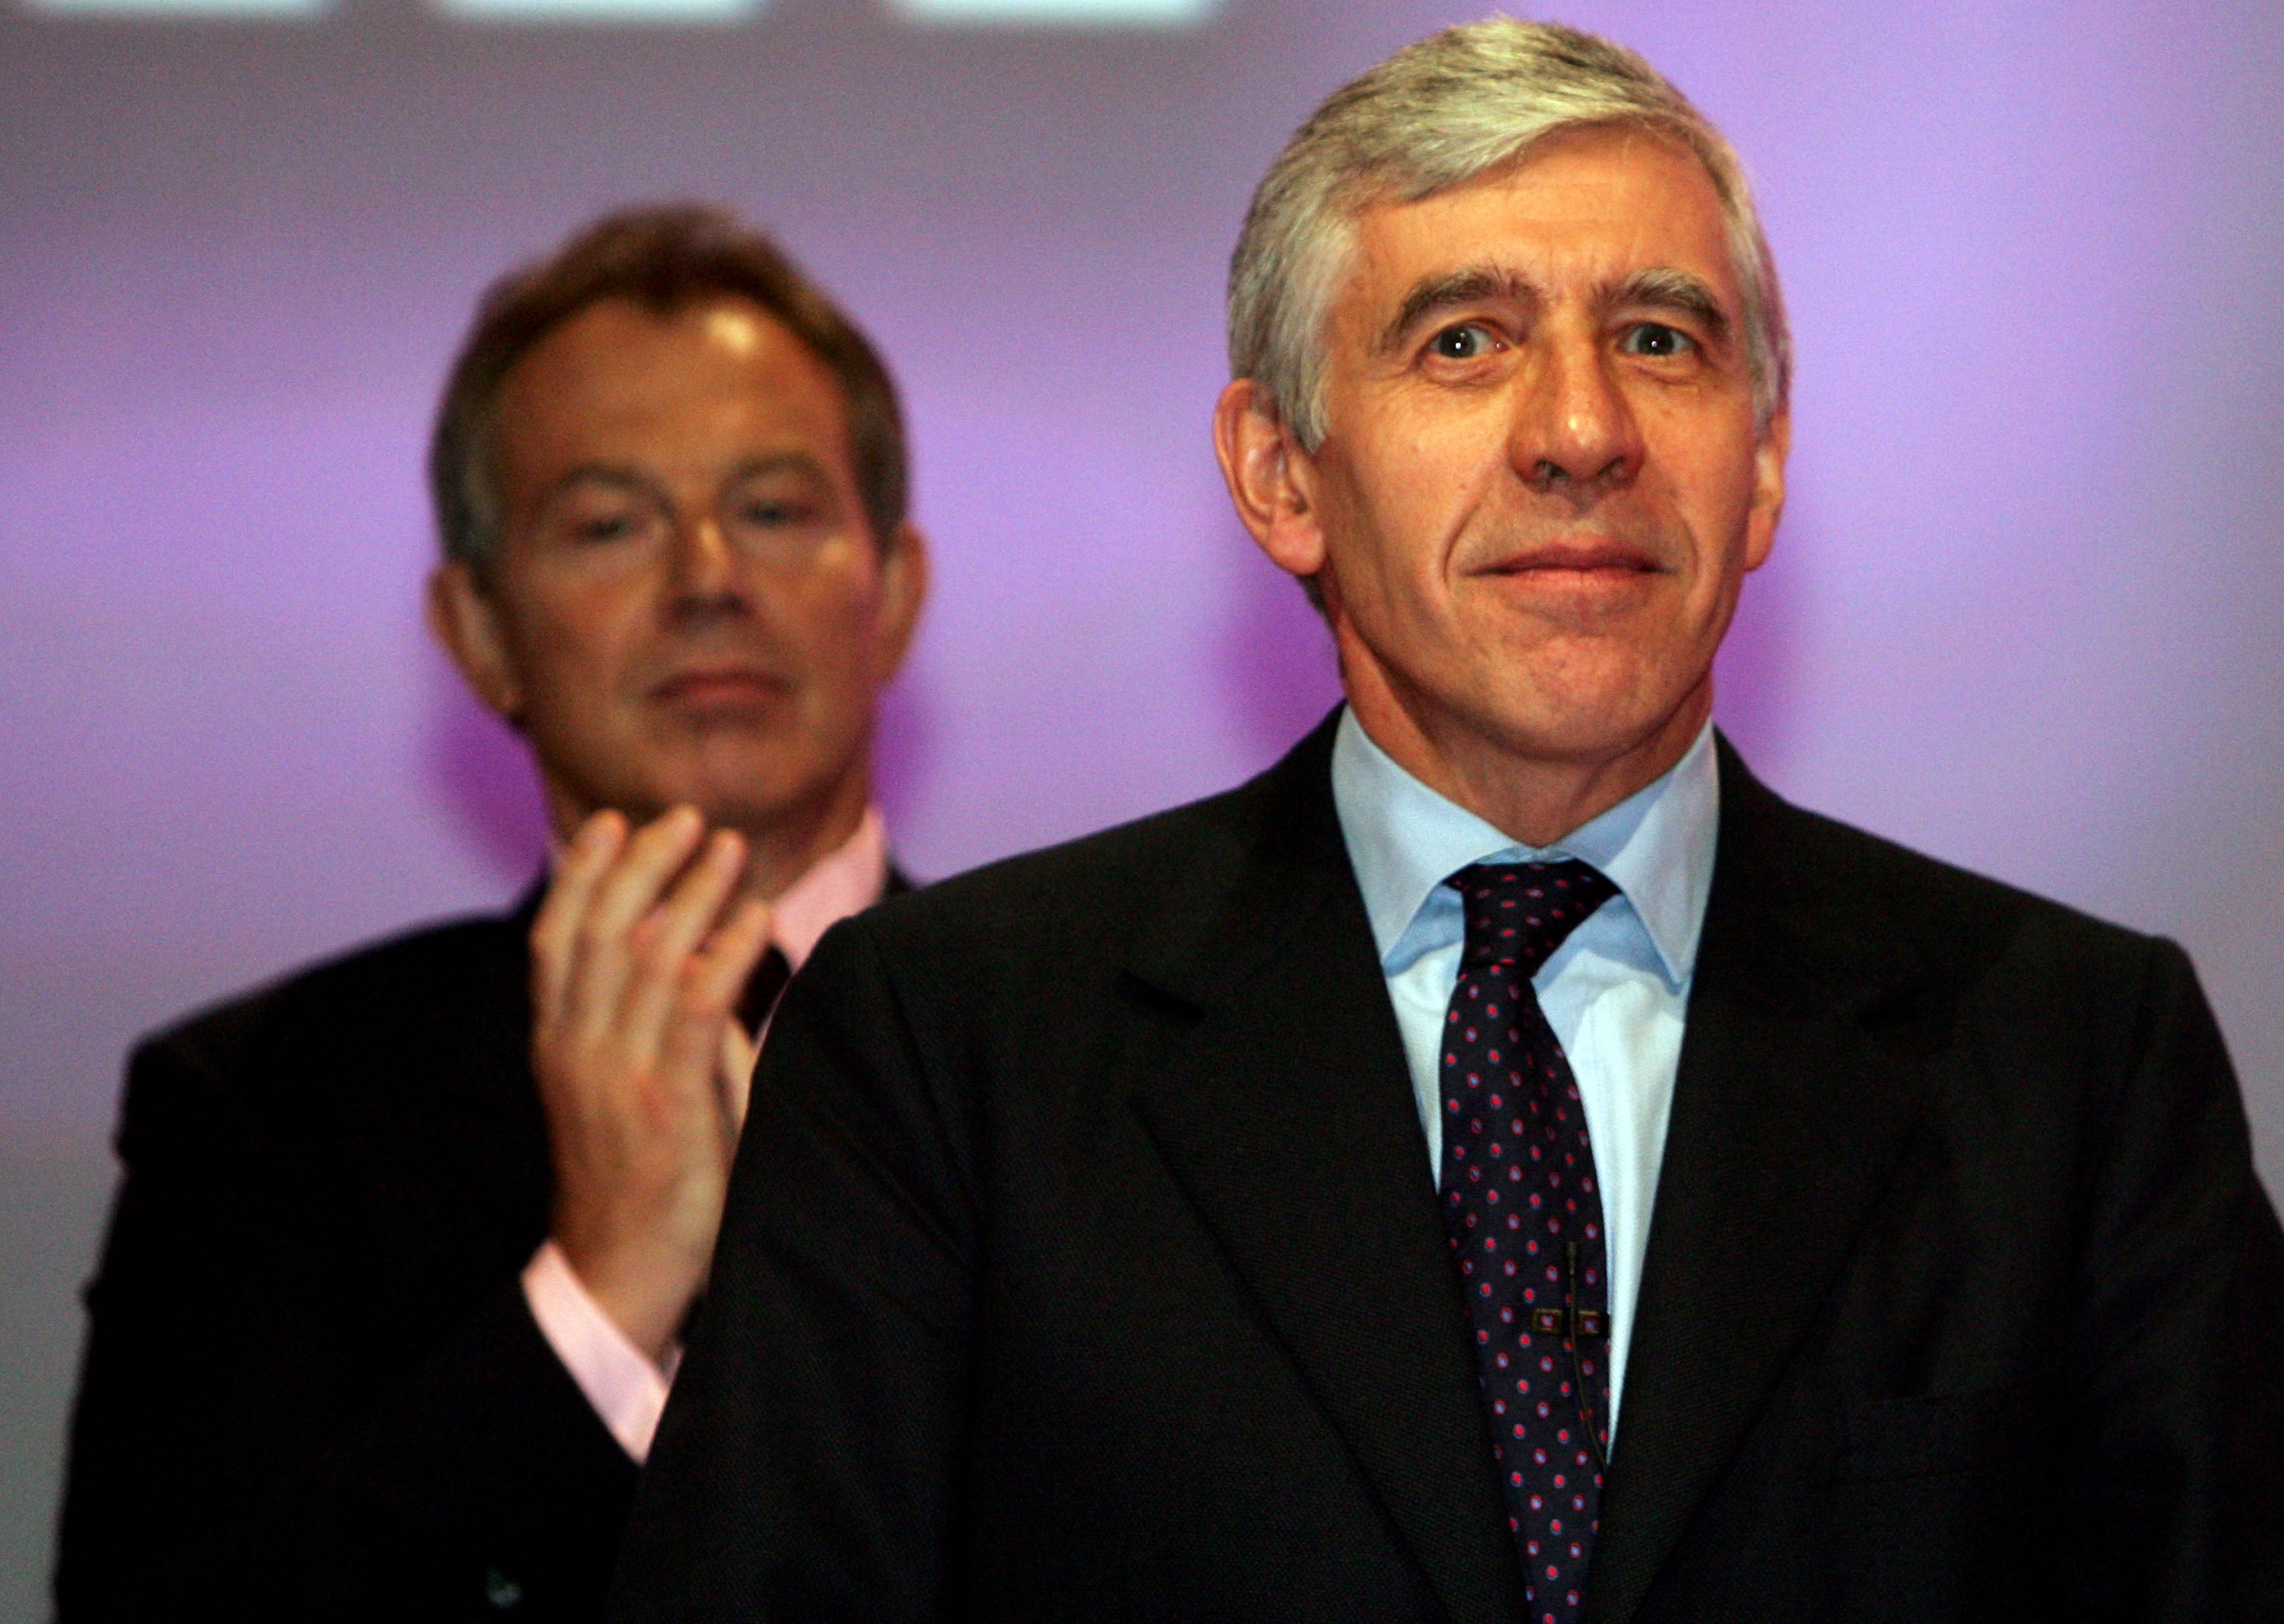 Tony Blair and Jack Straw at the Labour party conference in 2004